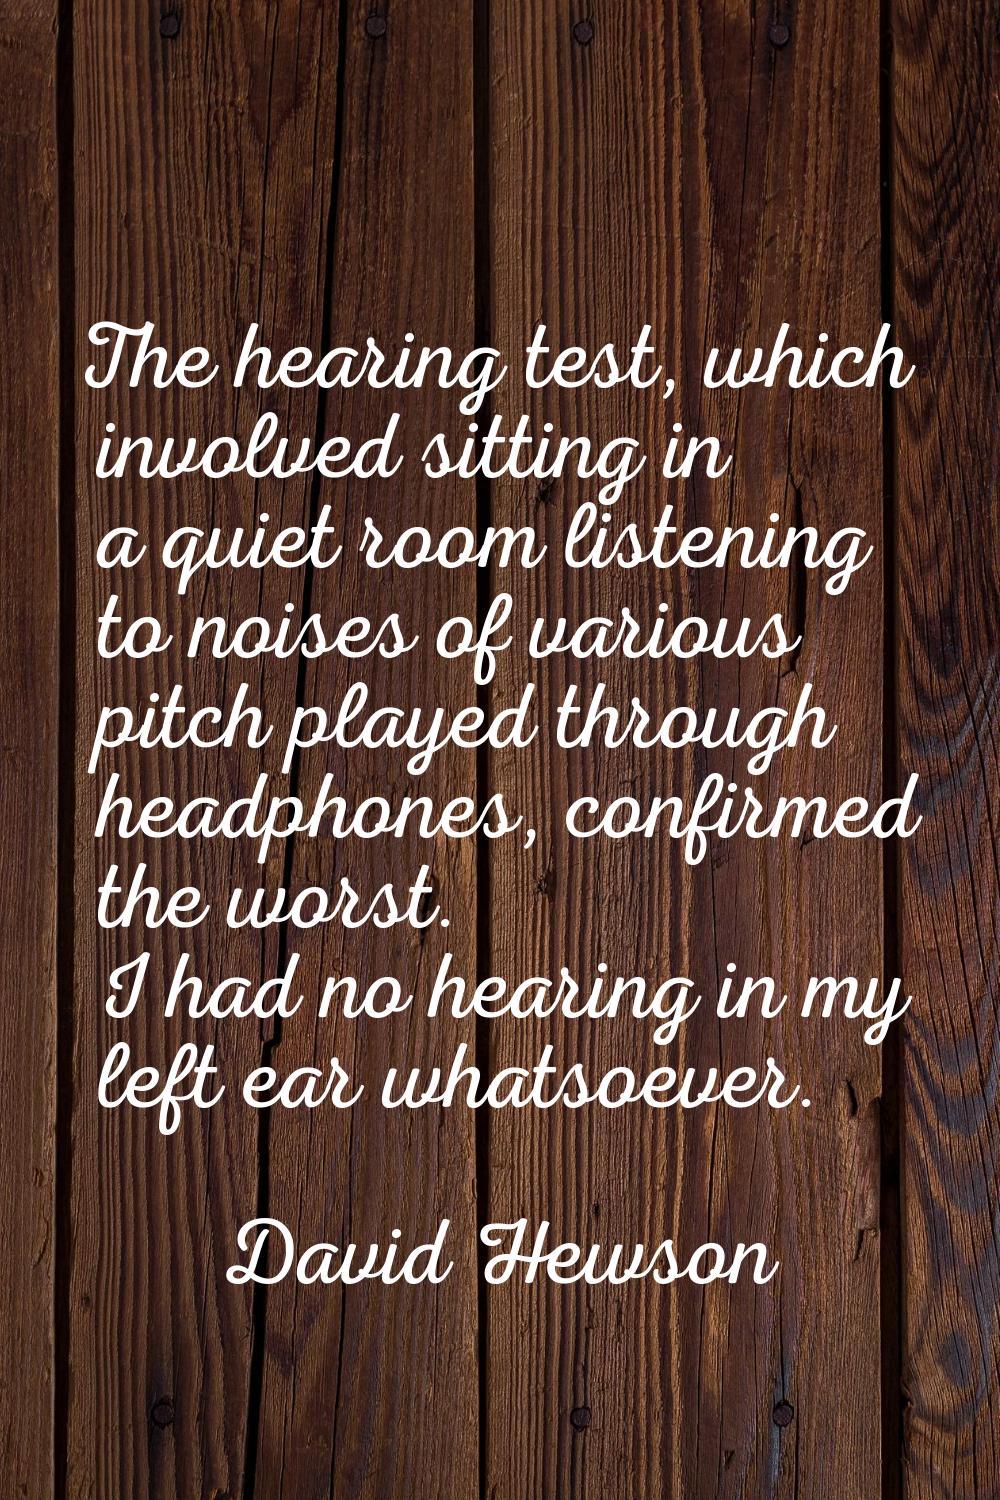 The hearing test, which involved sitting in a quiet room listening to noises of various pitch playe